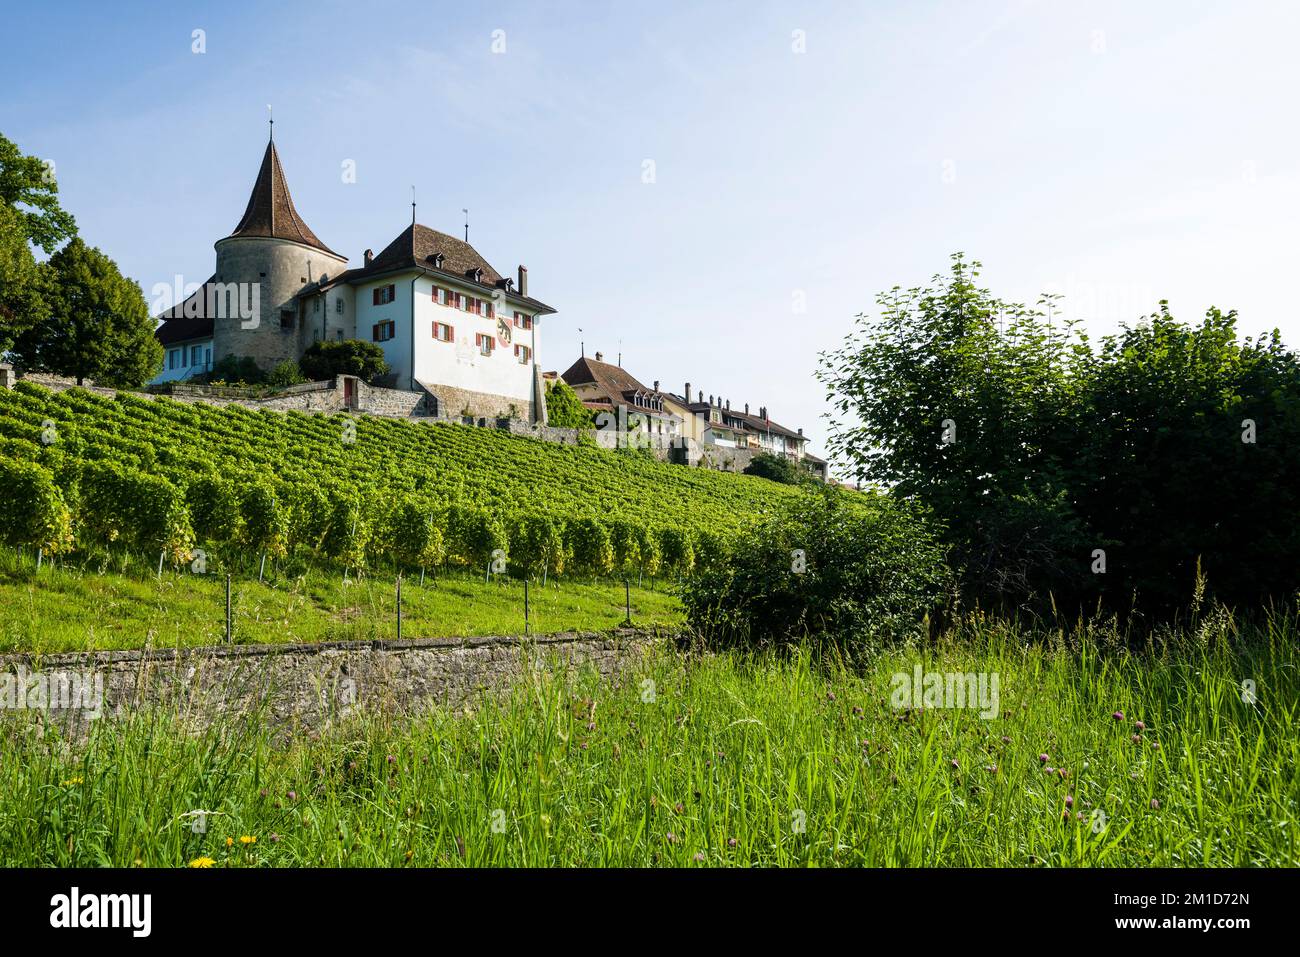 The Erlach Castle is located on a hill and surrounded by wine yards, overlooking the Lake Biel Stock Photo